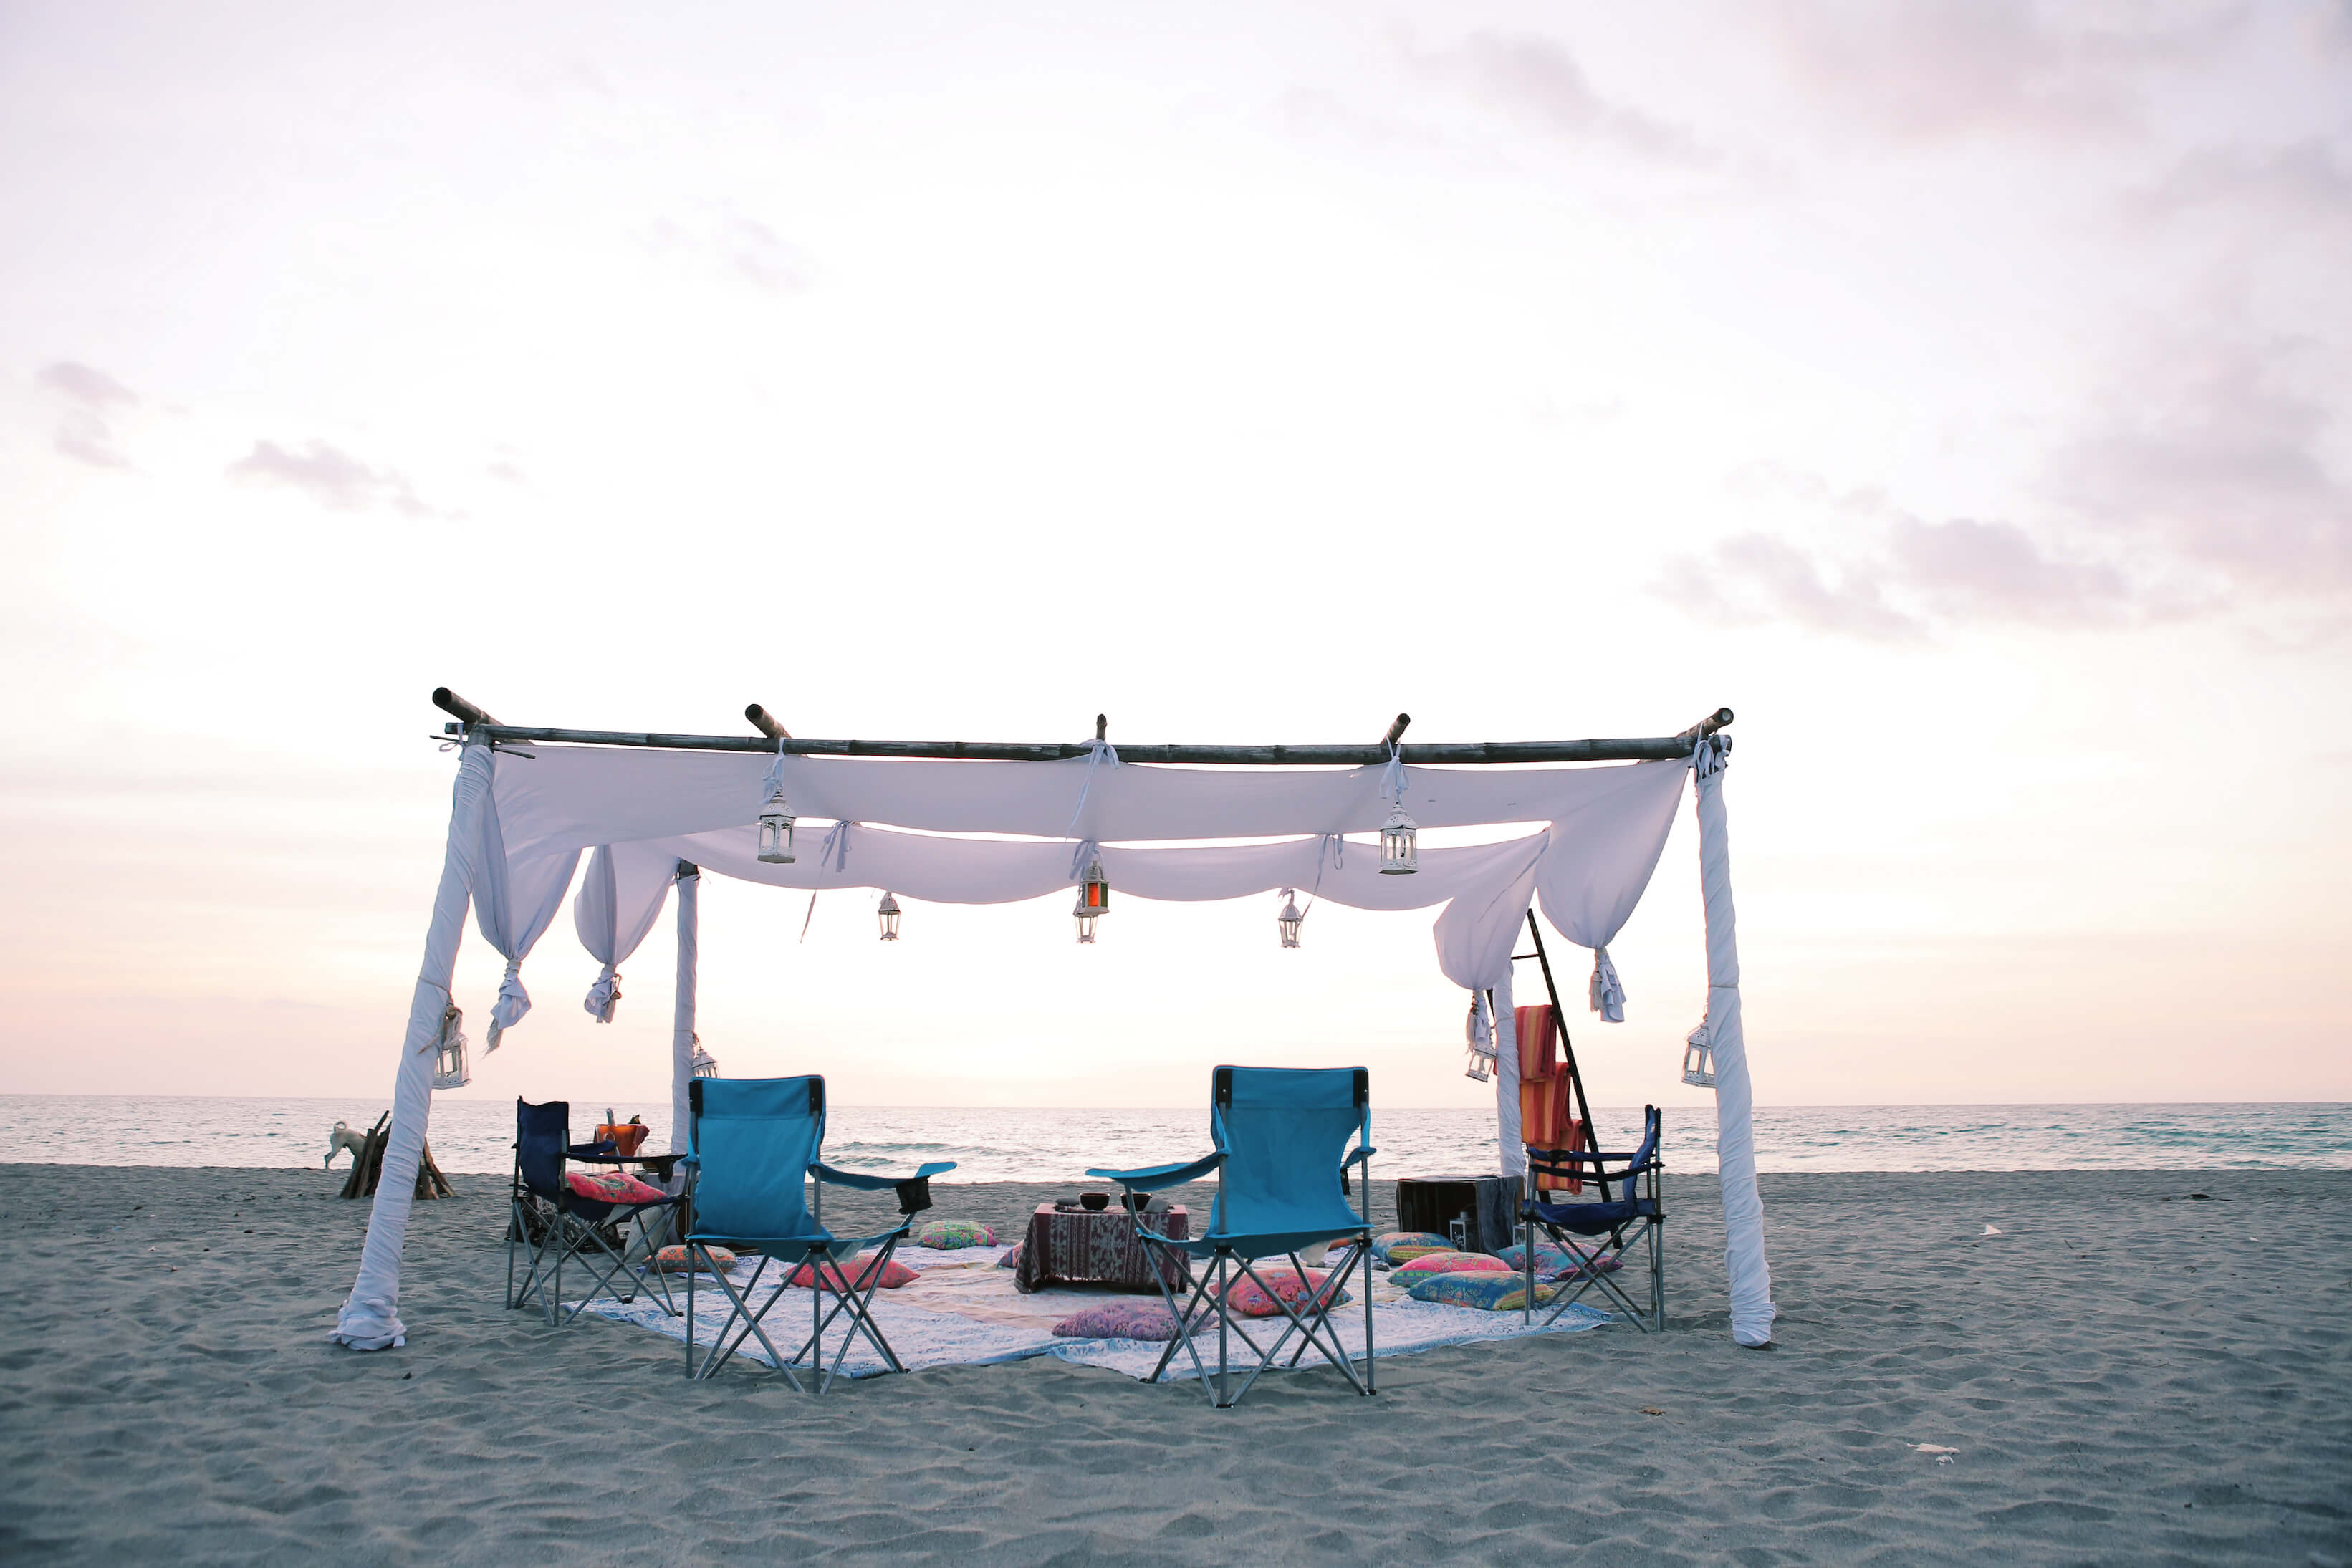 Camping chairs and beach blankets are arranged artfully beneath a gauzy tent with the setting sun in the distance.